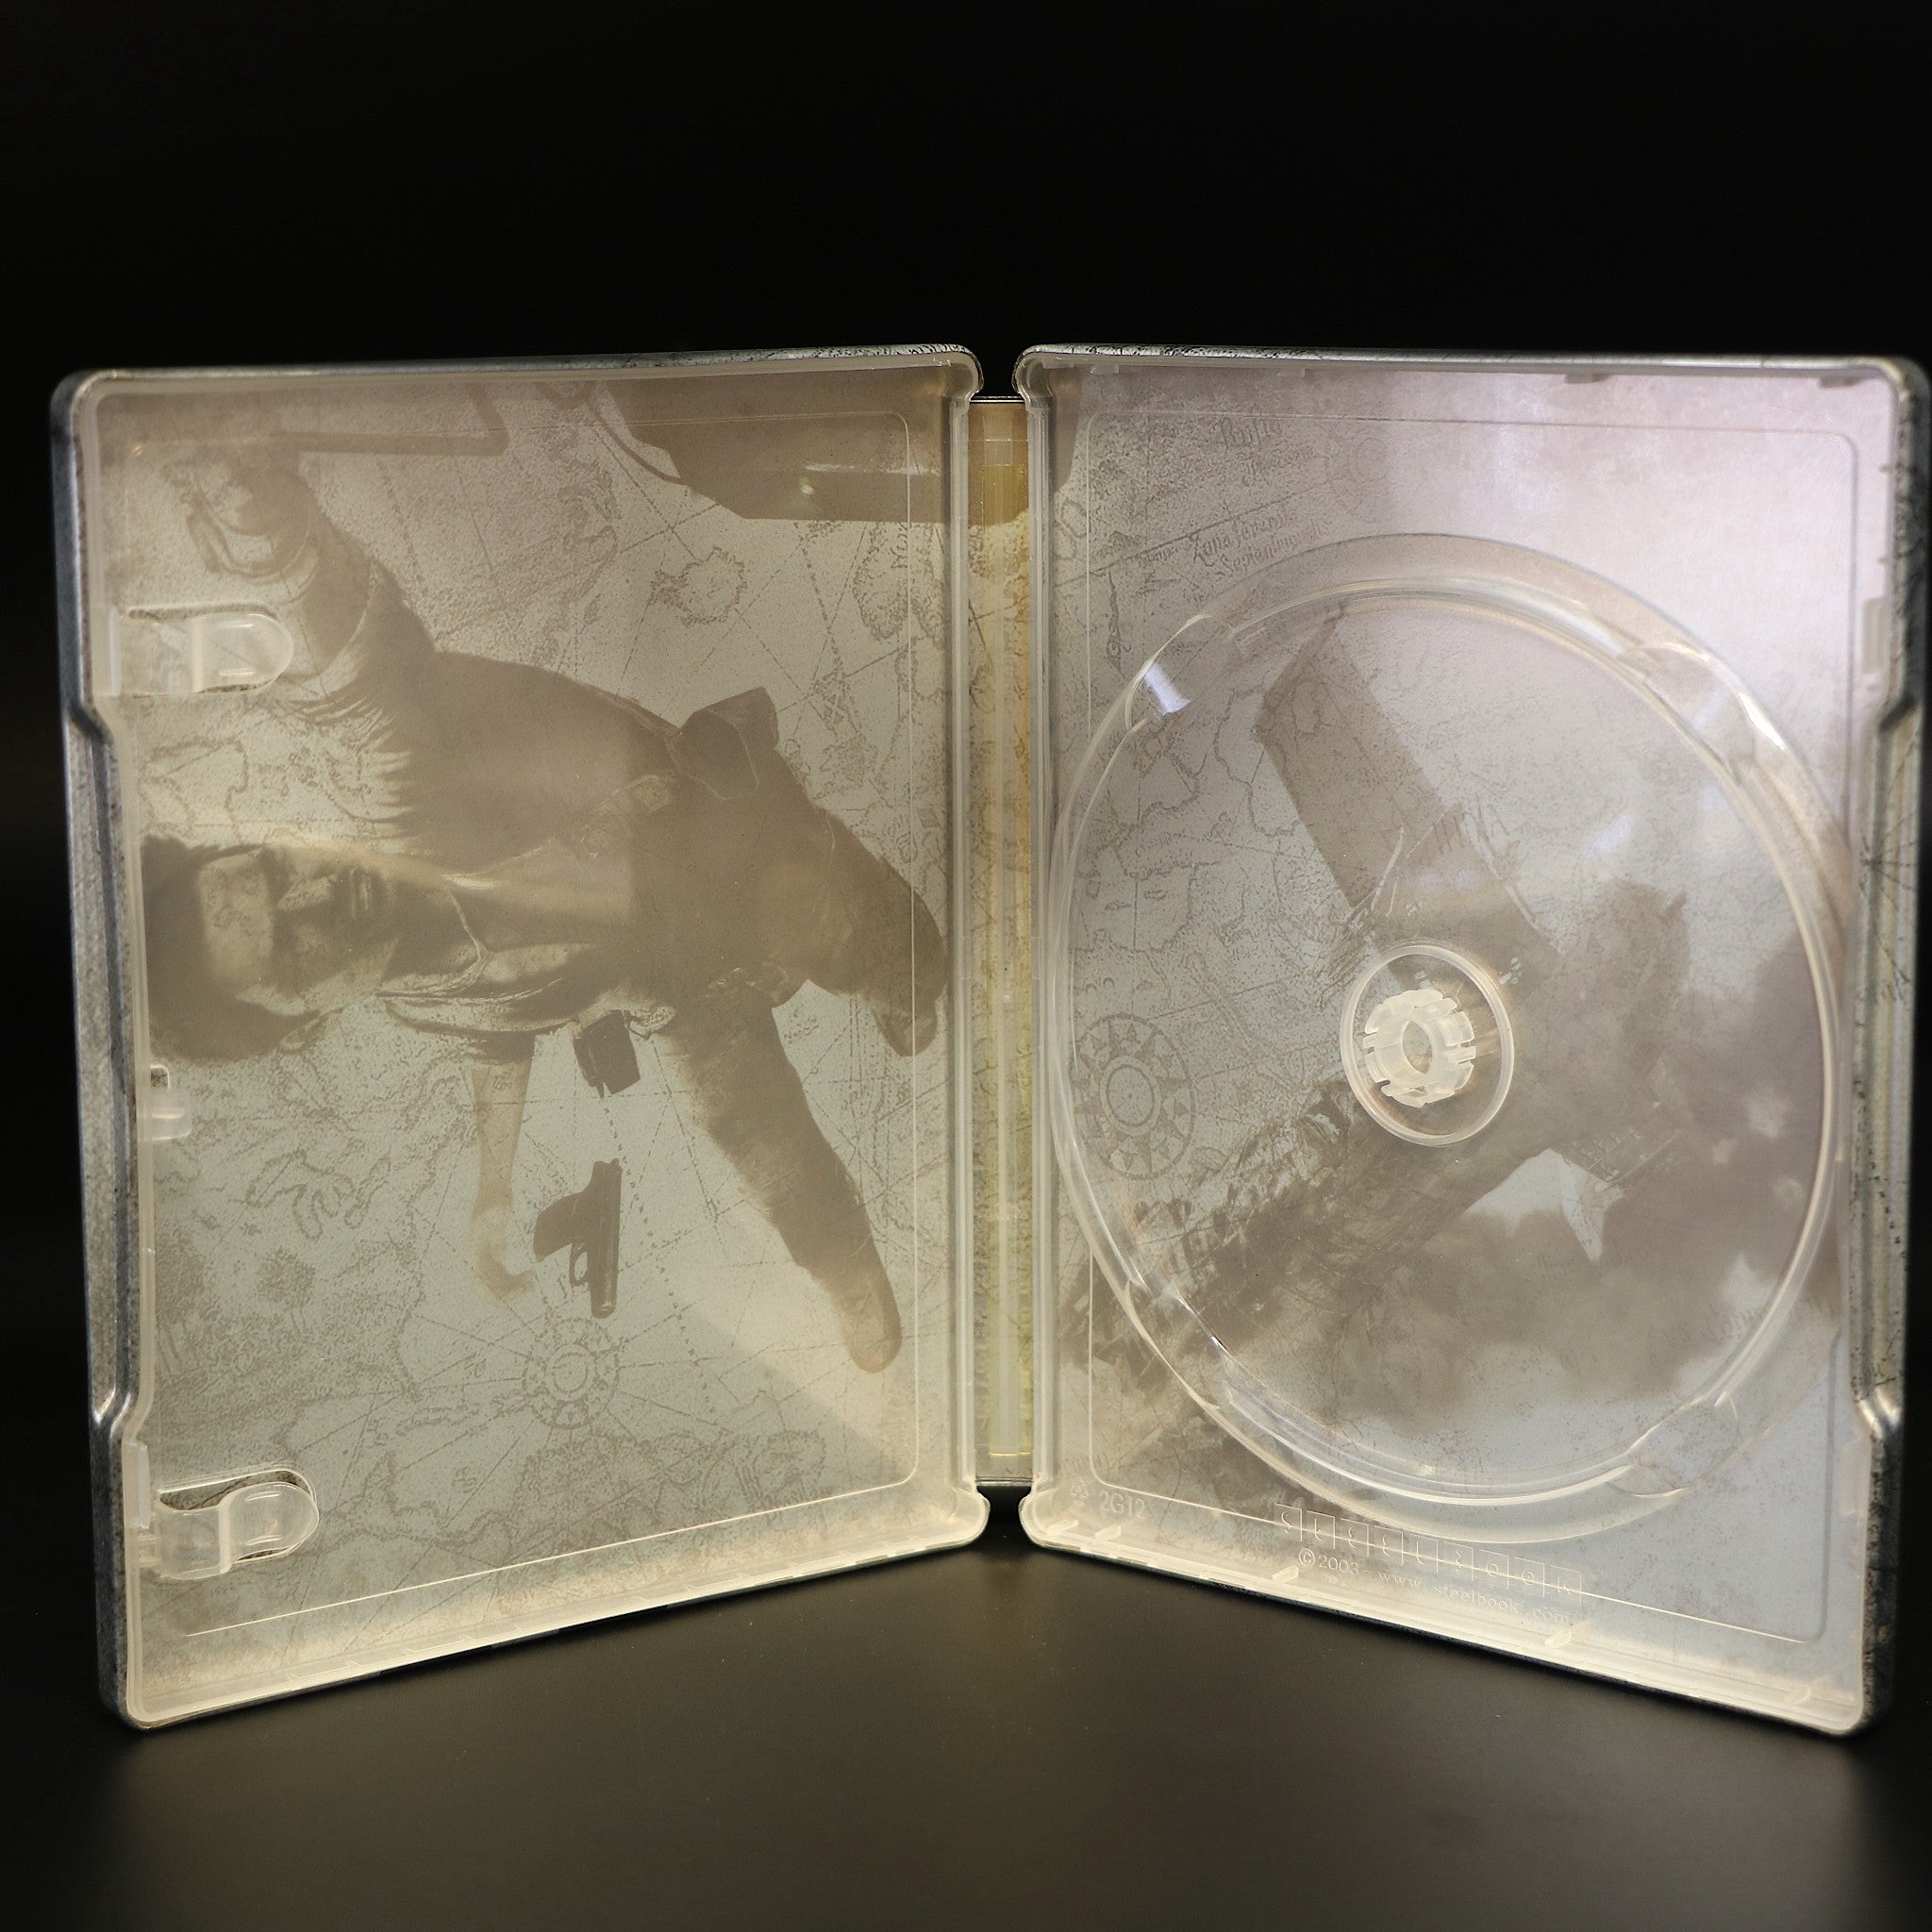 Uncharted Nathan Drake Collection | Special Edition SteelBook Tin Case PS4 | VGC